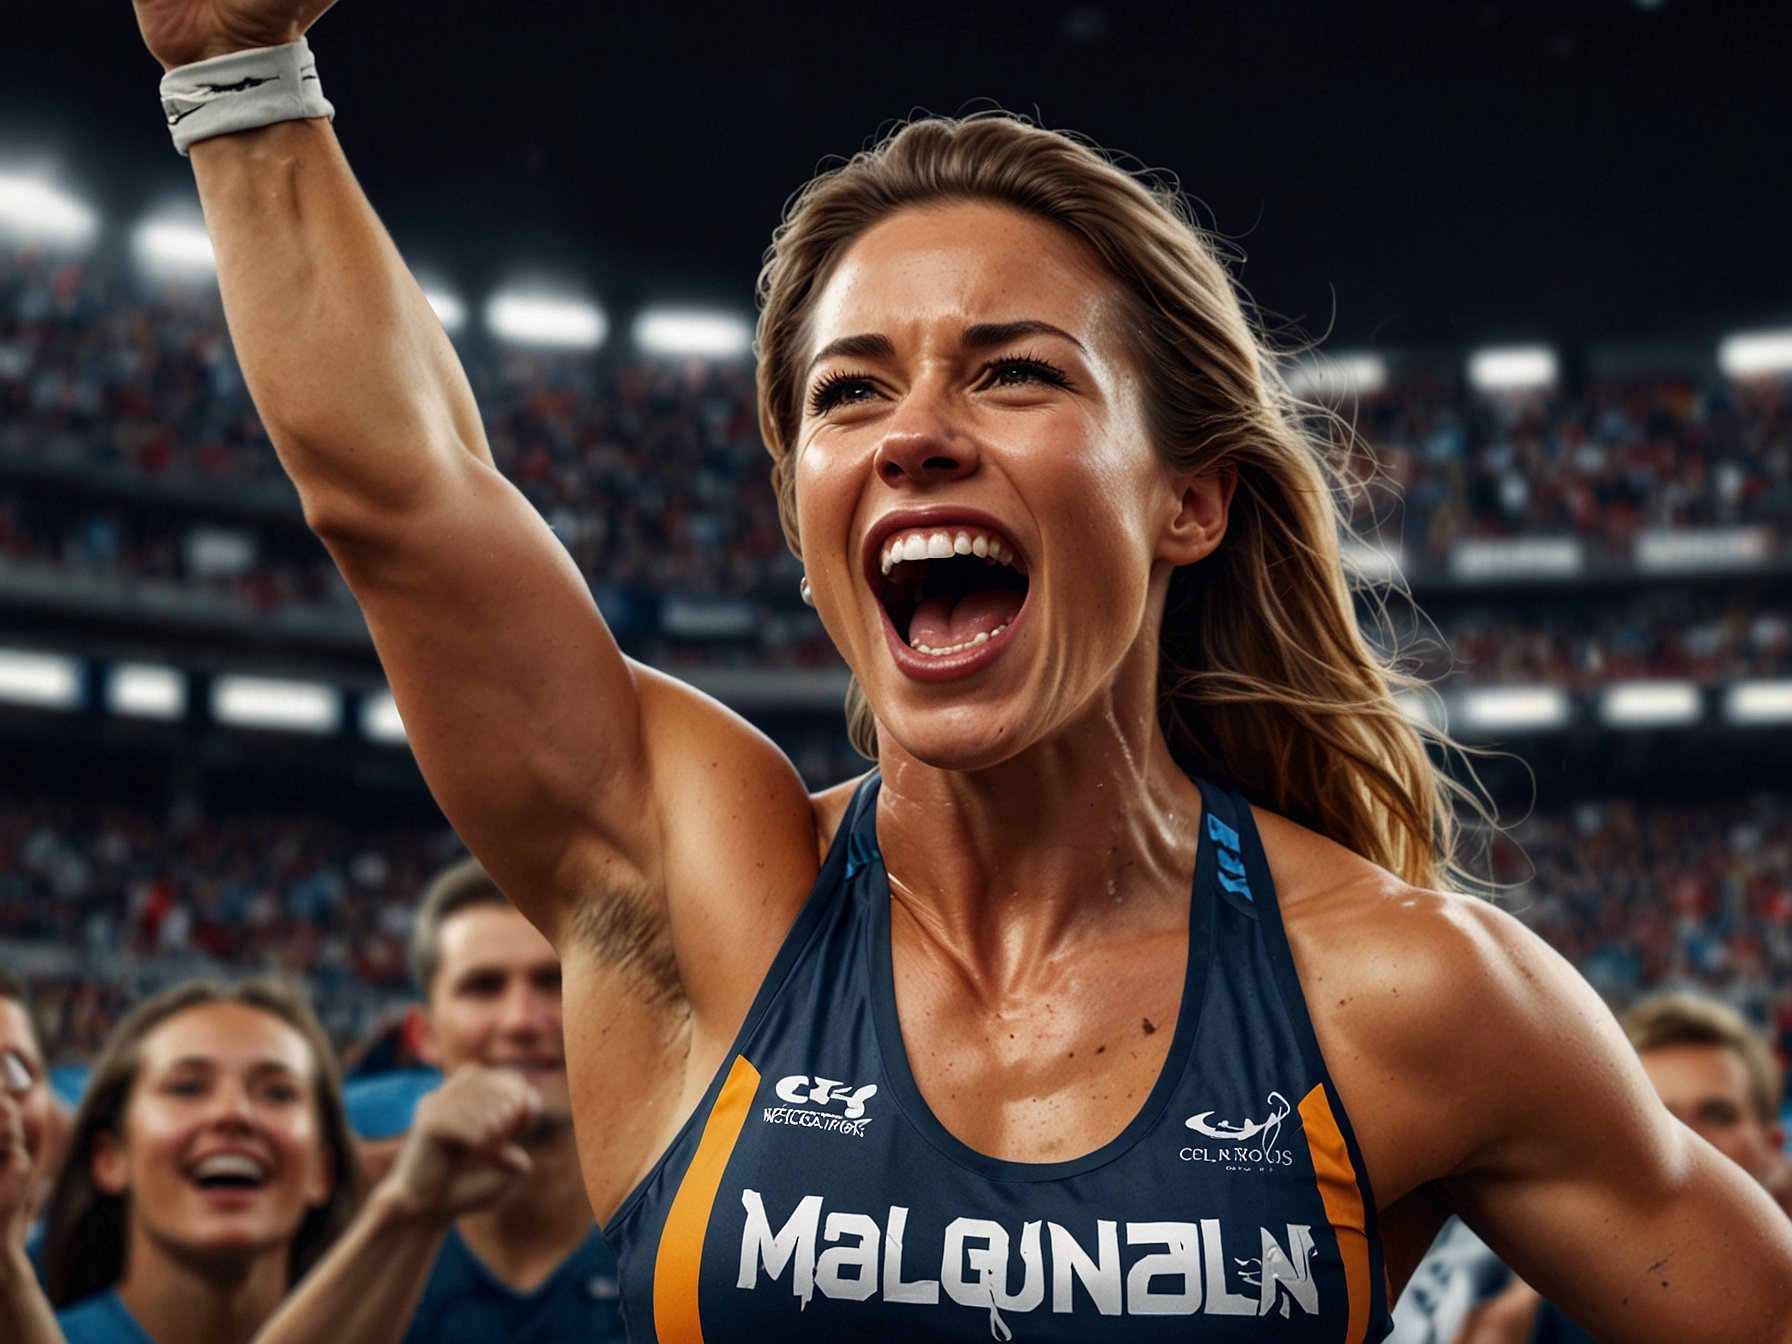 McLaughlin-Levrone celebrating her victory and new world record with fans and teammates. Her determined expression and the backdrop of the stadium highlight the significance of her achievement.